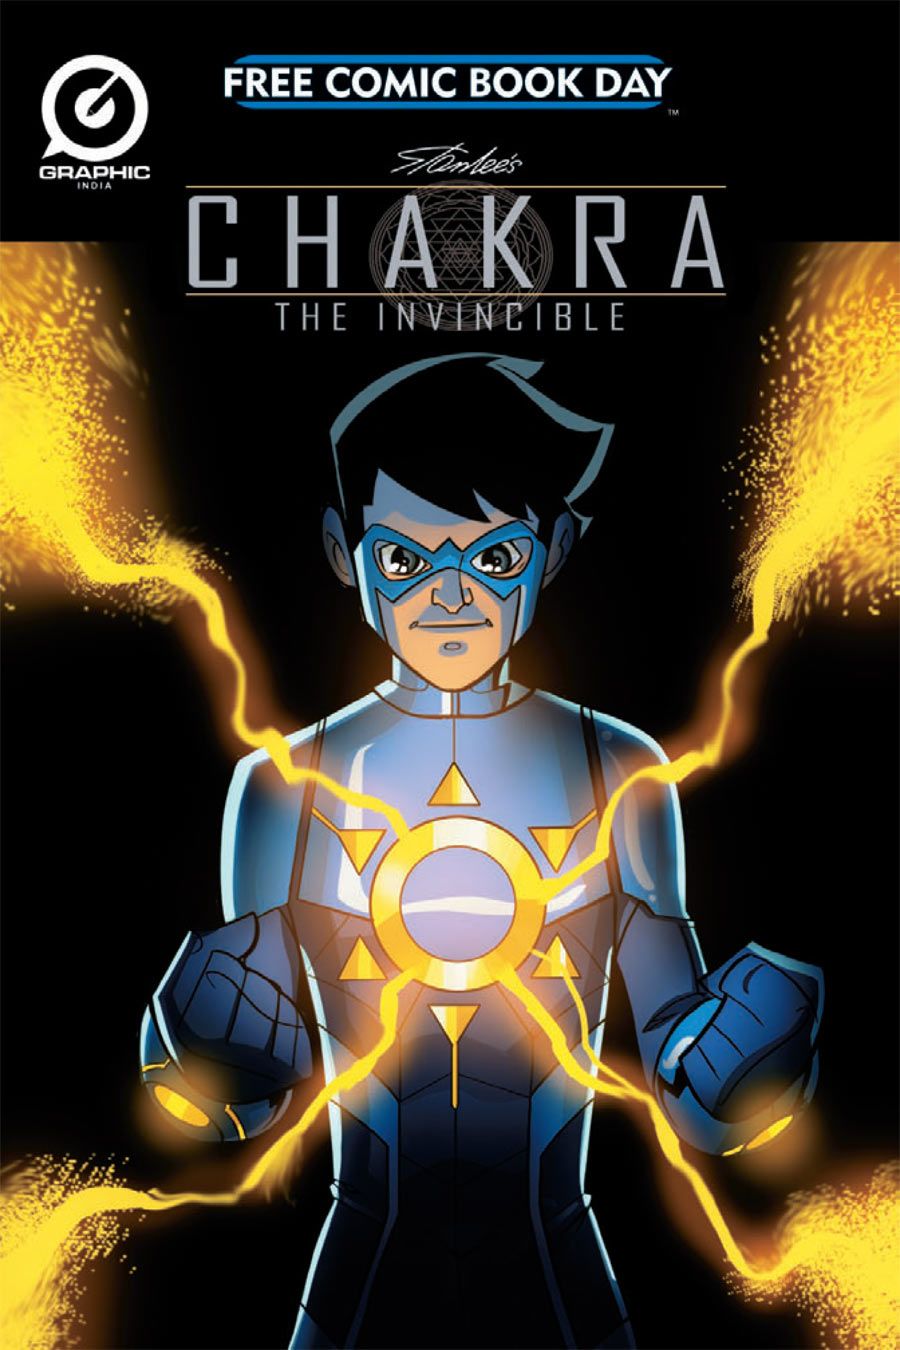 Stan lee chakra the invincible preview: wiki, news, video, photographs